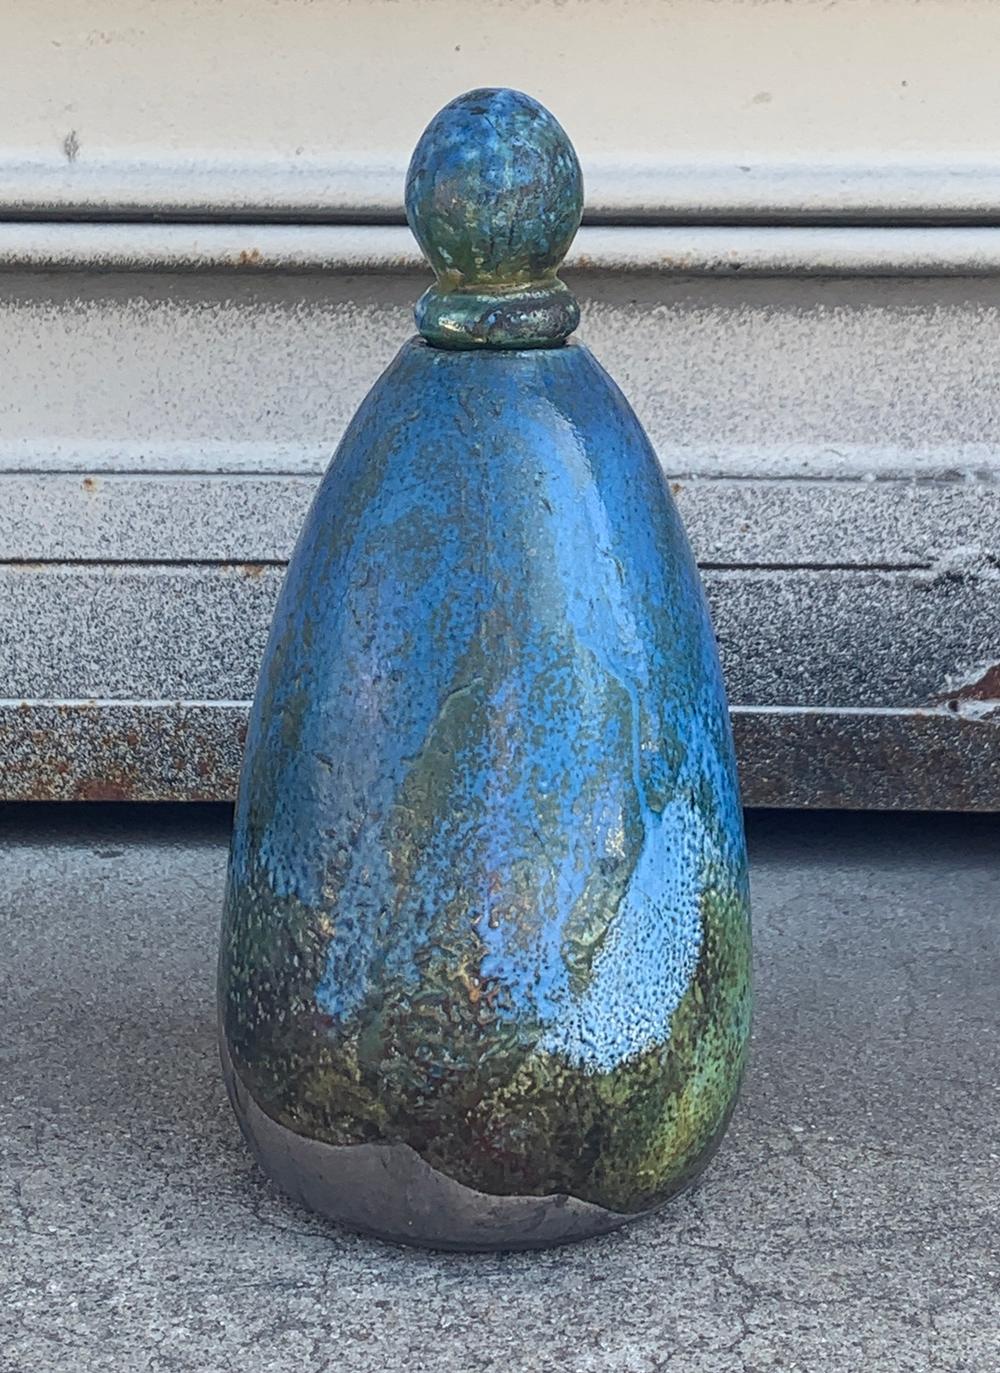 Beautiful ceramic vessel with lid made in Santa Barbara California by James and Linda Haggerty.

The piece has beautiful tones and is in excellent condition.

Measurements:
7.50 high x 3.50 diameter.